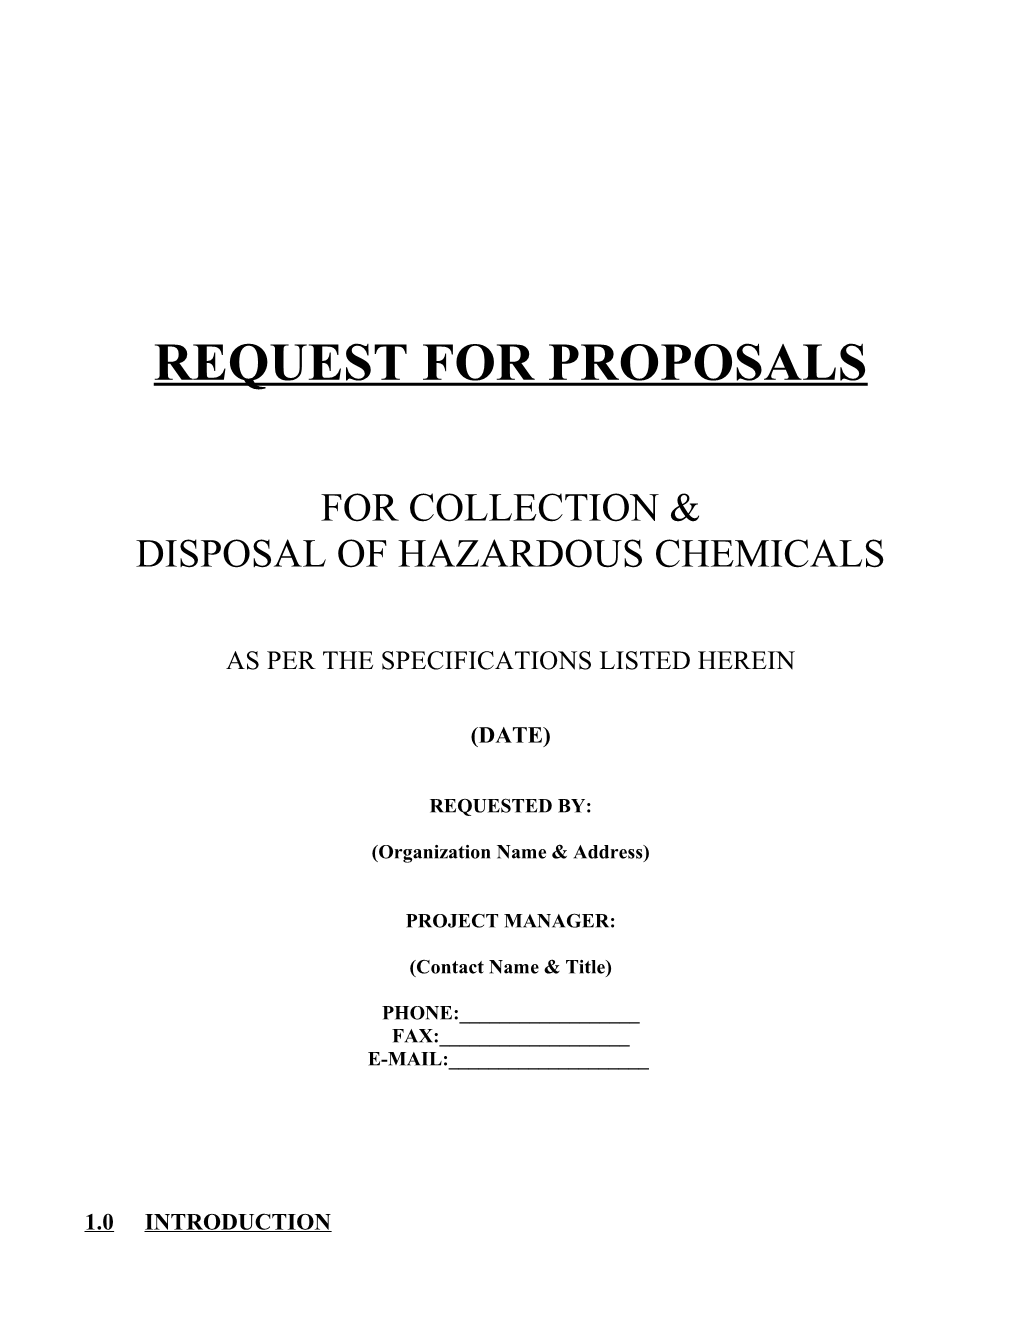 Request for Proposals s51